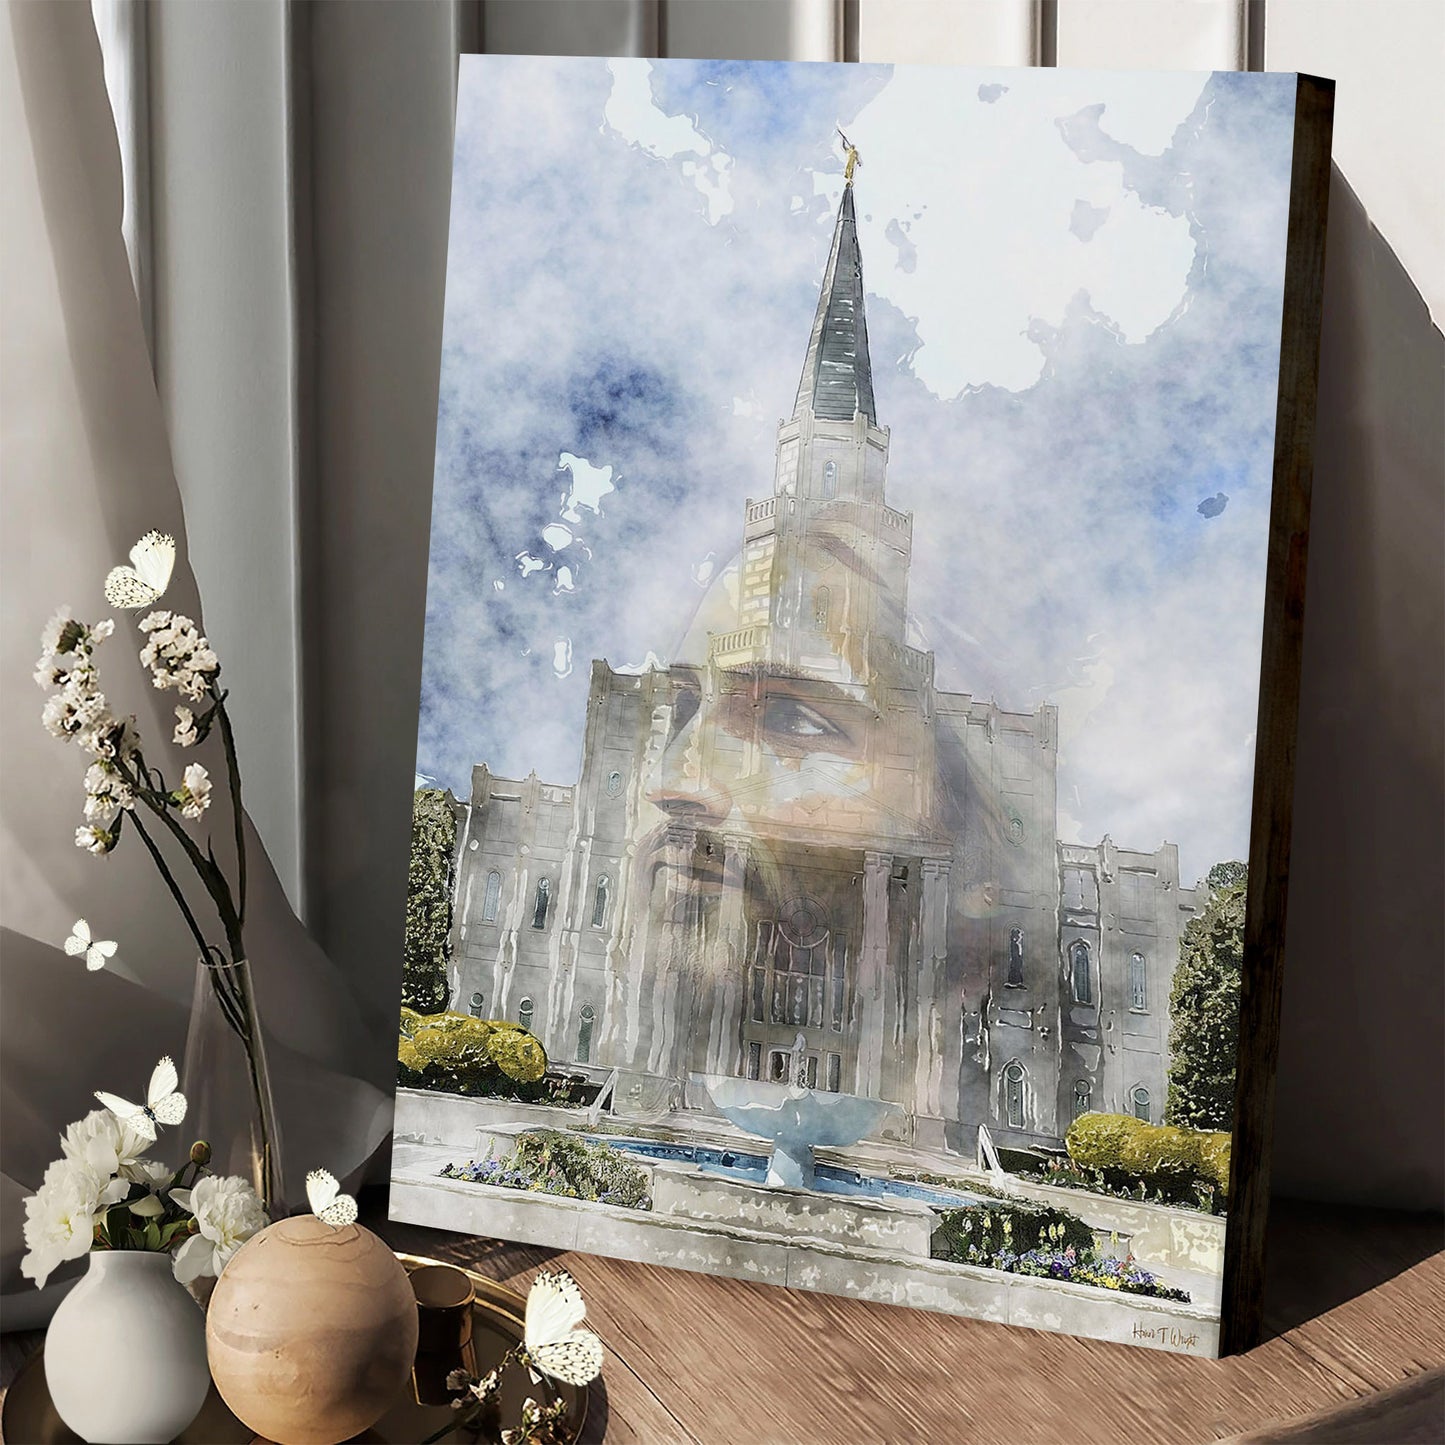 Houston Texas Temple Jesus Christ Watercolor Painting Pray - Jesus Canvas Pictures - Christian Wall Art